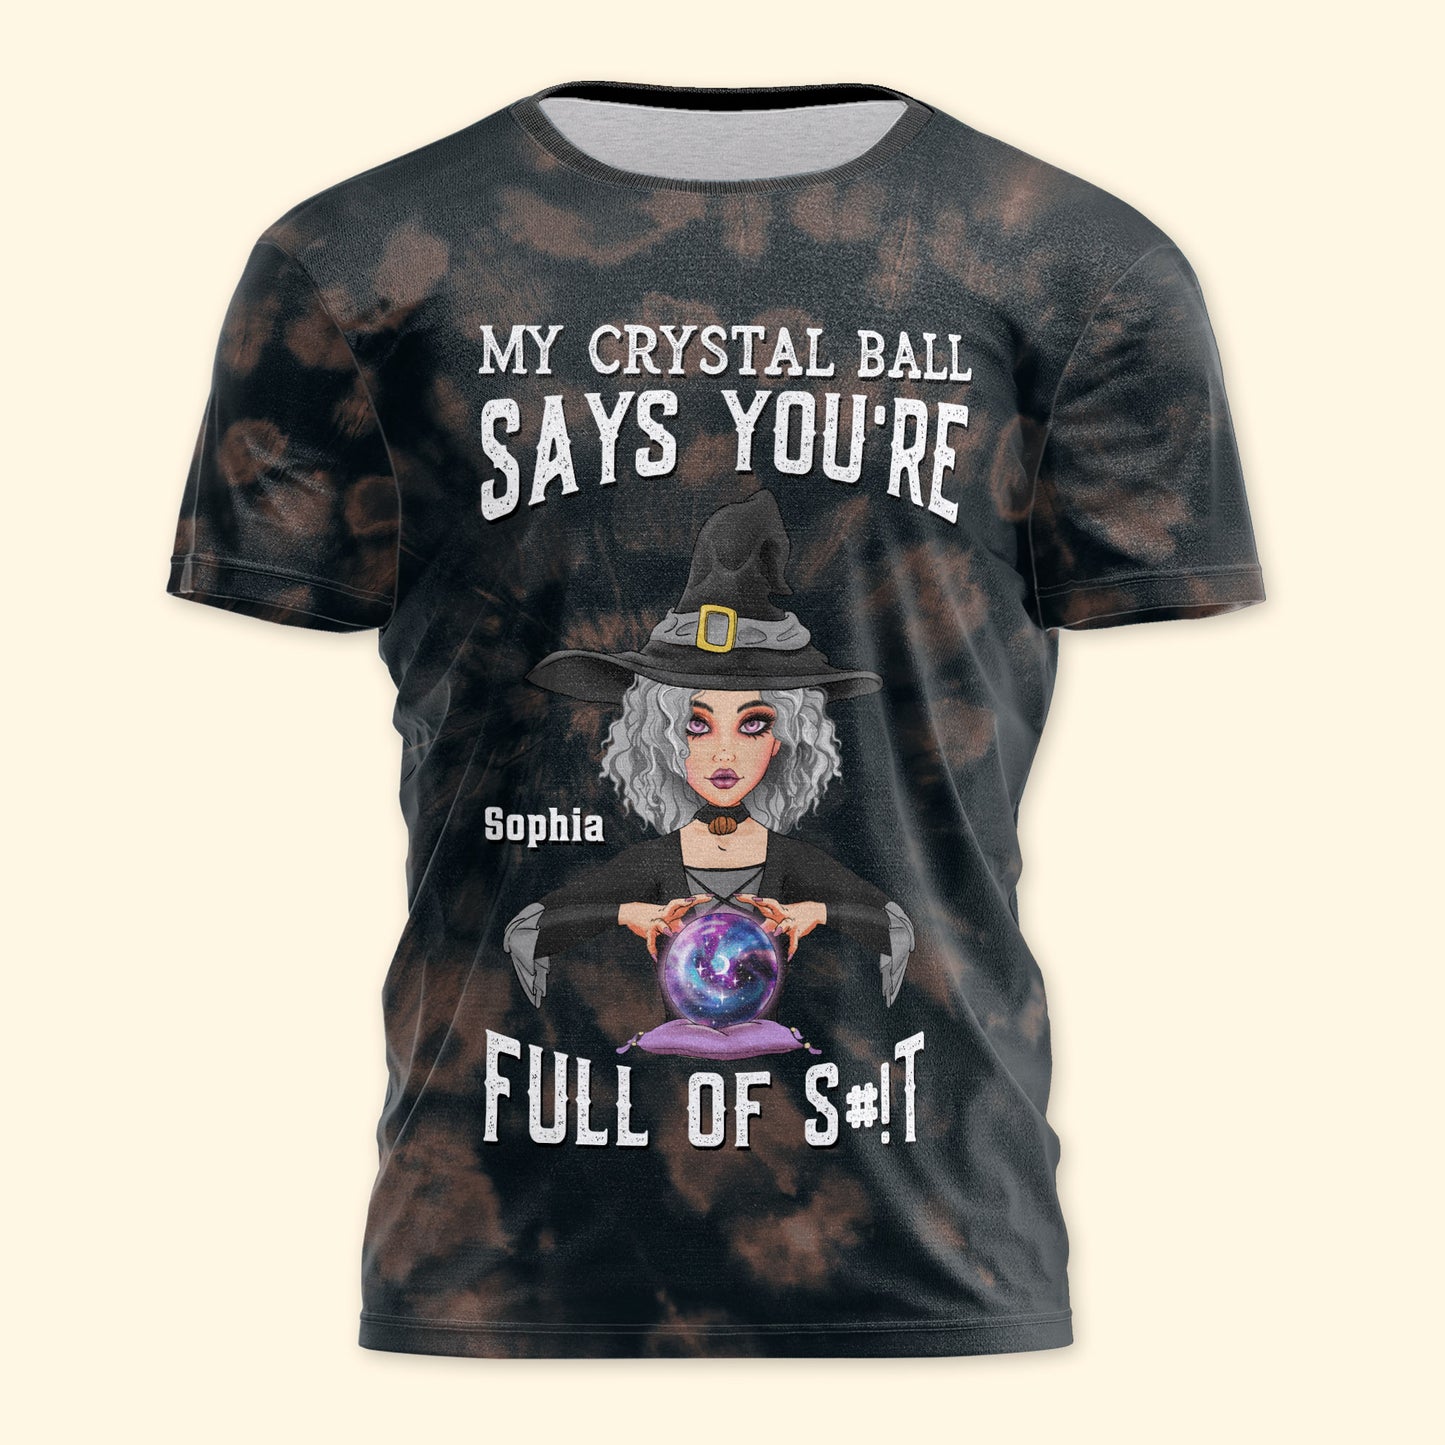 My Crystal Ball Says You're Full Of S#!t - Personalized Tie Dye 3D All Over Printed Shirt - Funny Halloween Gift For Witch, Fortune Teller